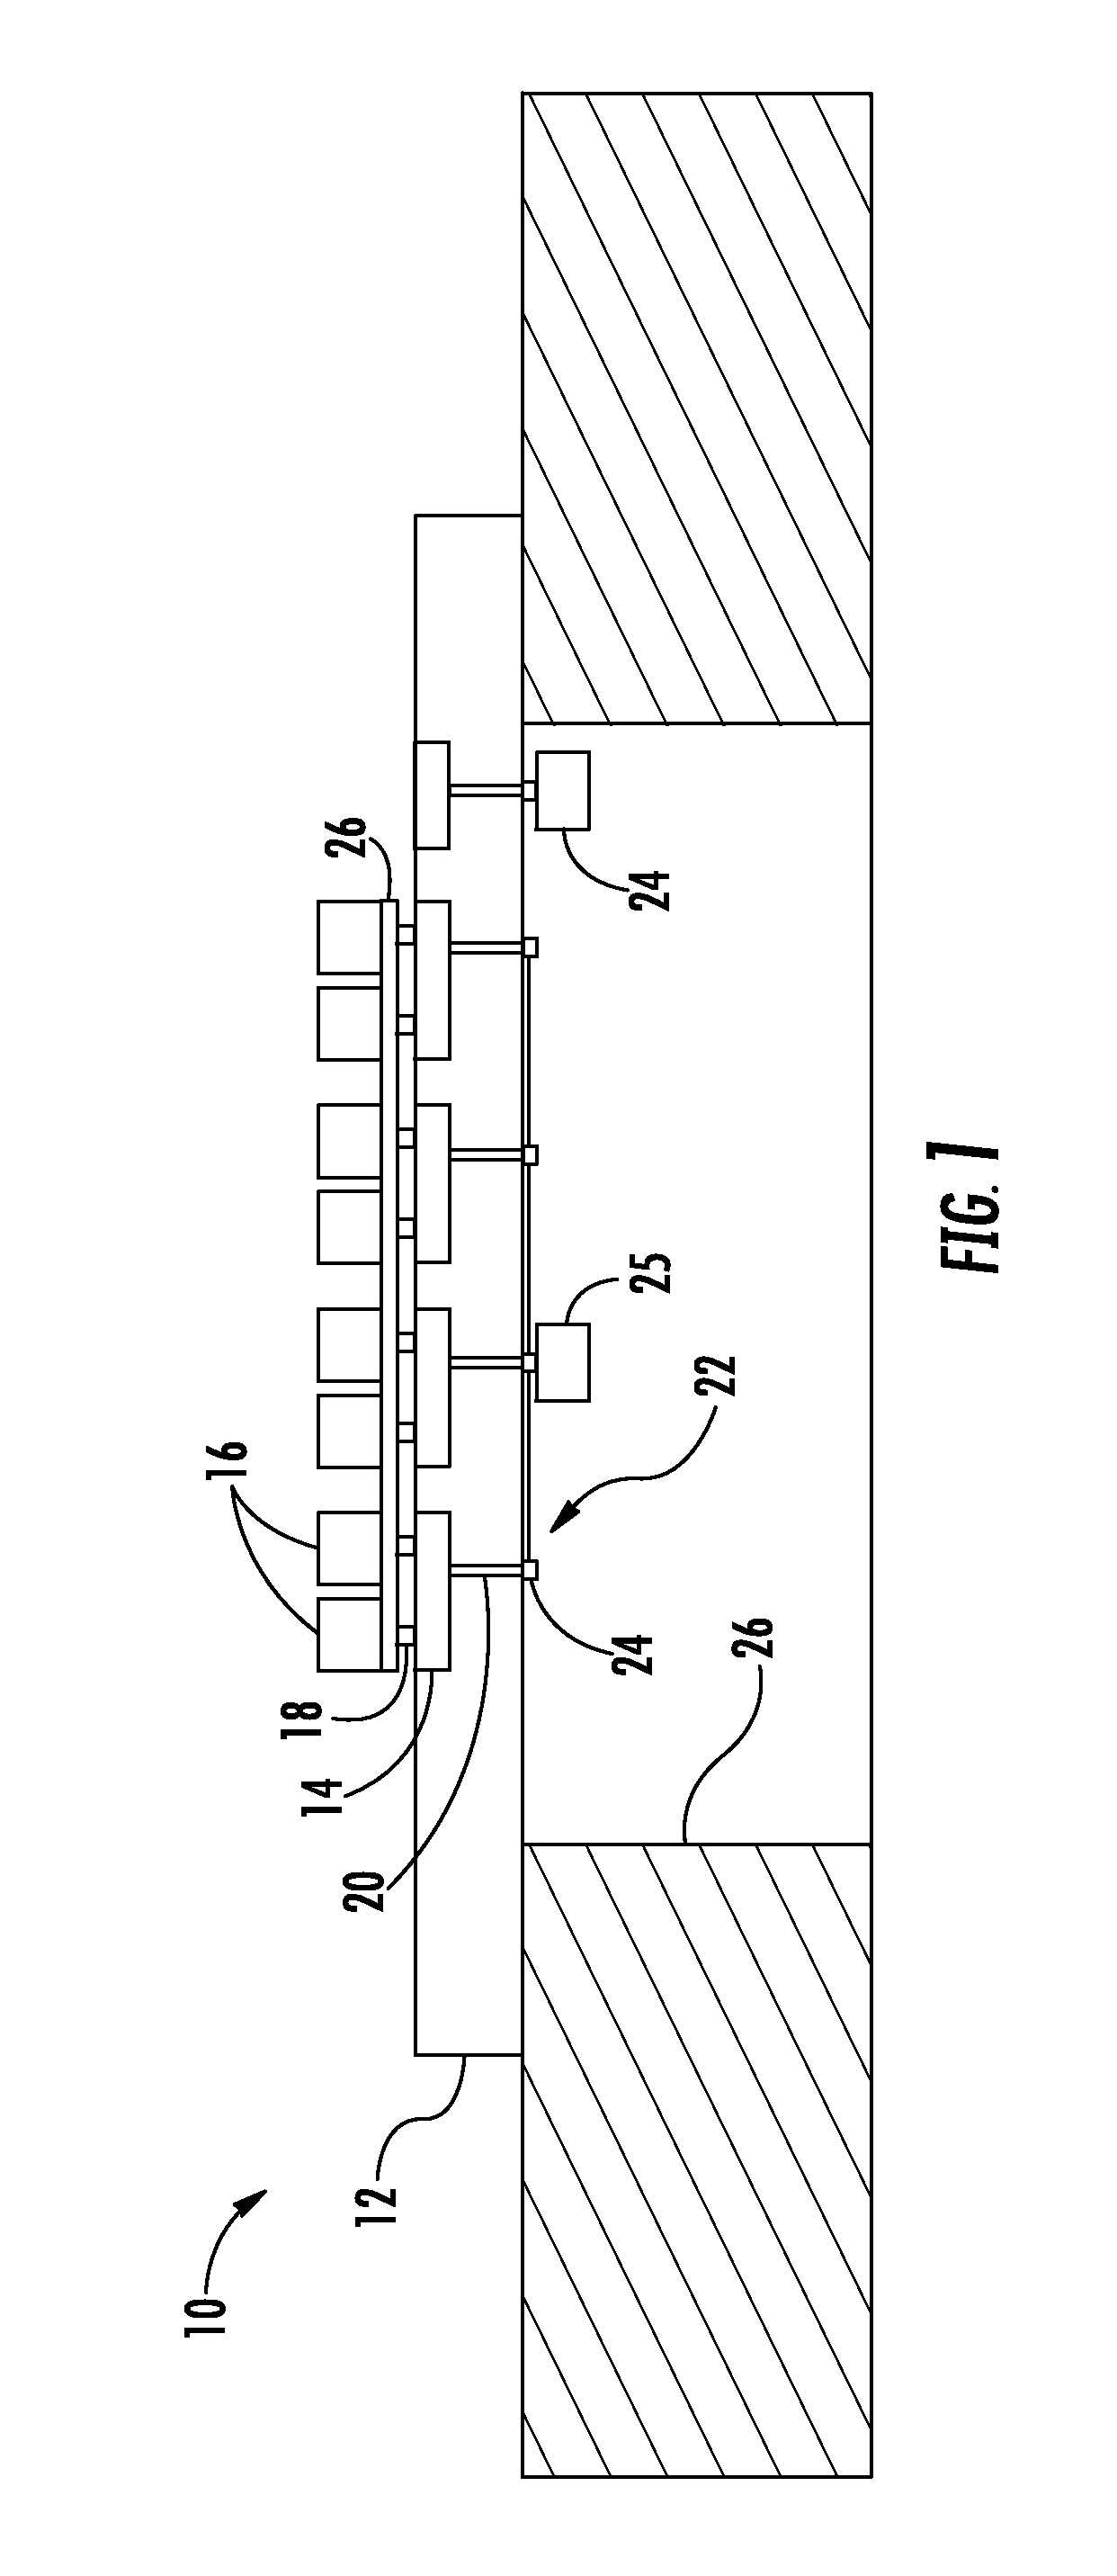 Phased array antenna module and method of making same